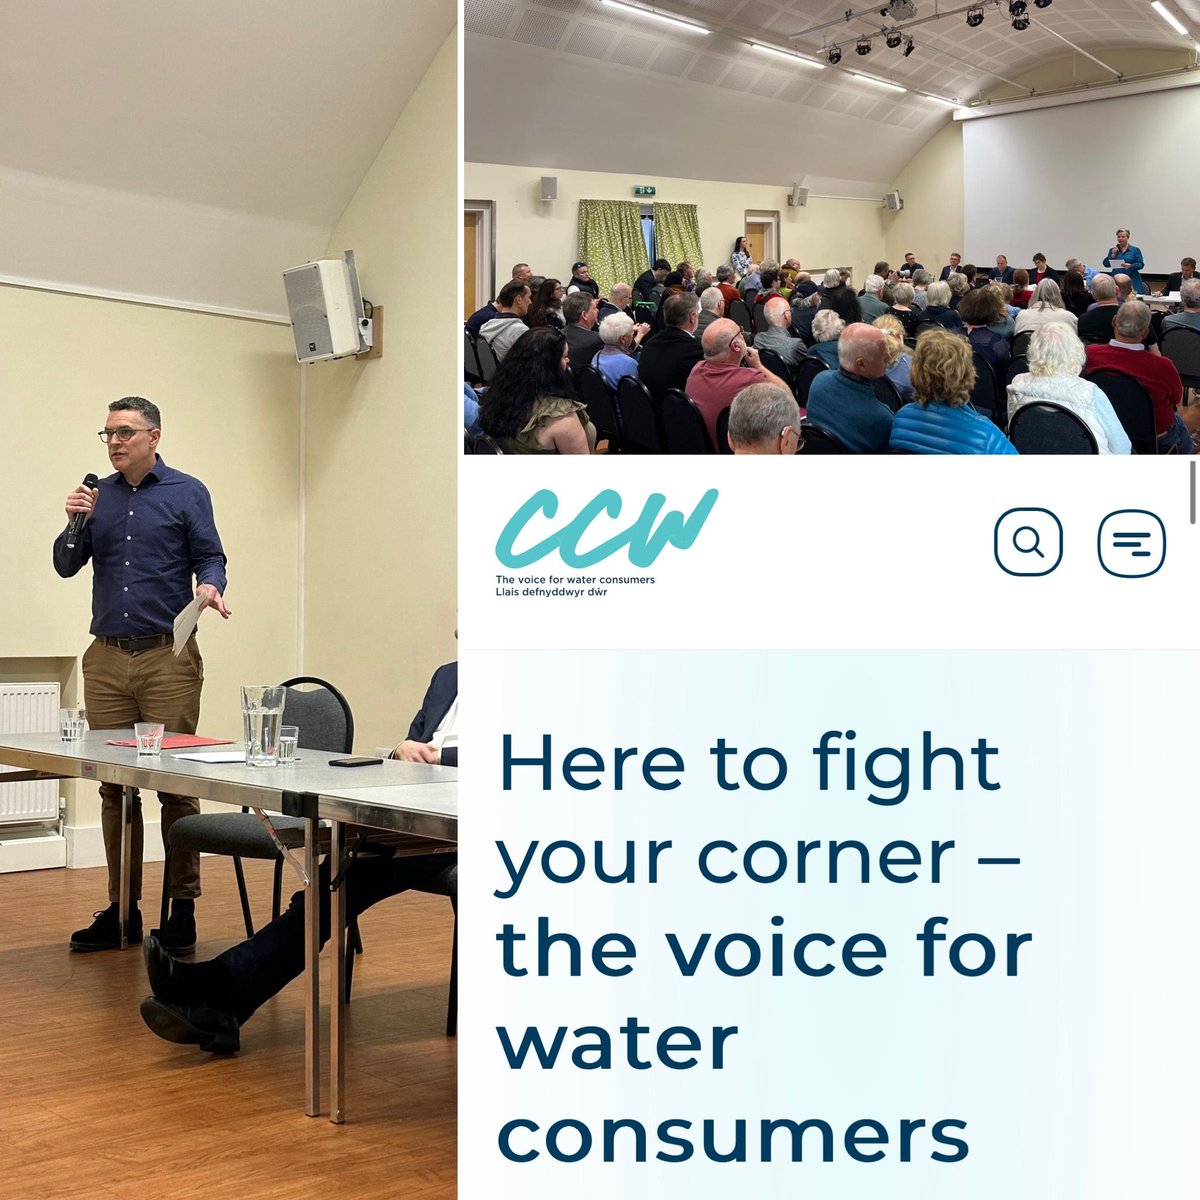 Consumer Council for Water (CCW) – drop-in session for residents 3rd May 9-11am After the last public meeting with Thames Water I followed up with Mike Keil CEO of the Consumer Council for Water (CCW) to ensure constituents are properly represented. Mike and his team offered to…